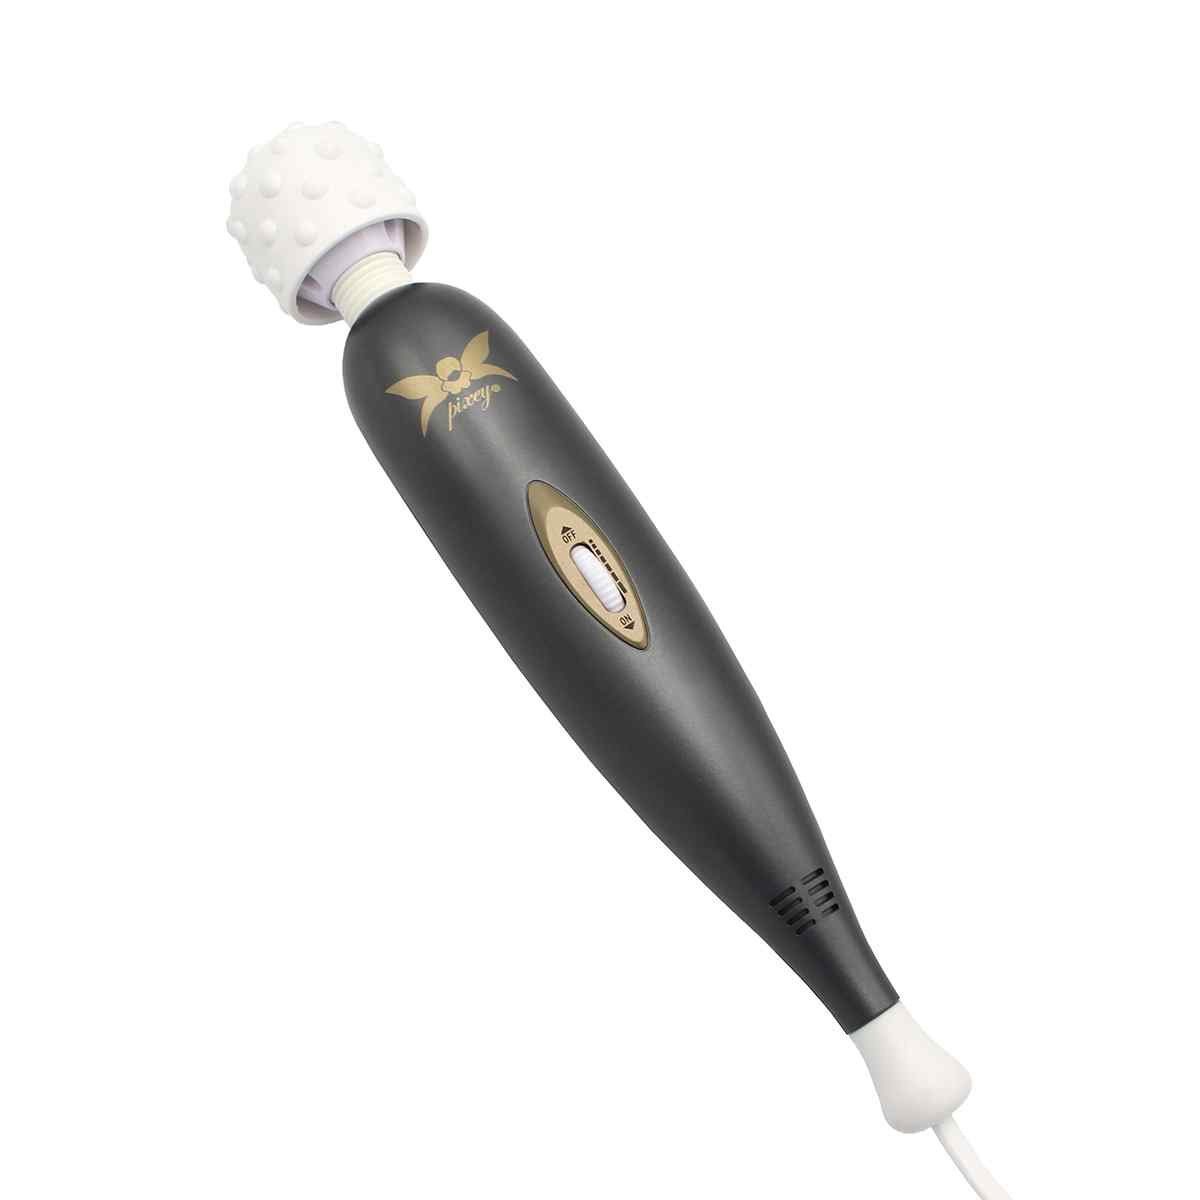 PIXEY Massager Vibration (New Exceed Pixey extrem Wand kraftvolle Edition),